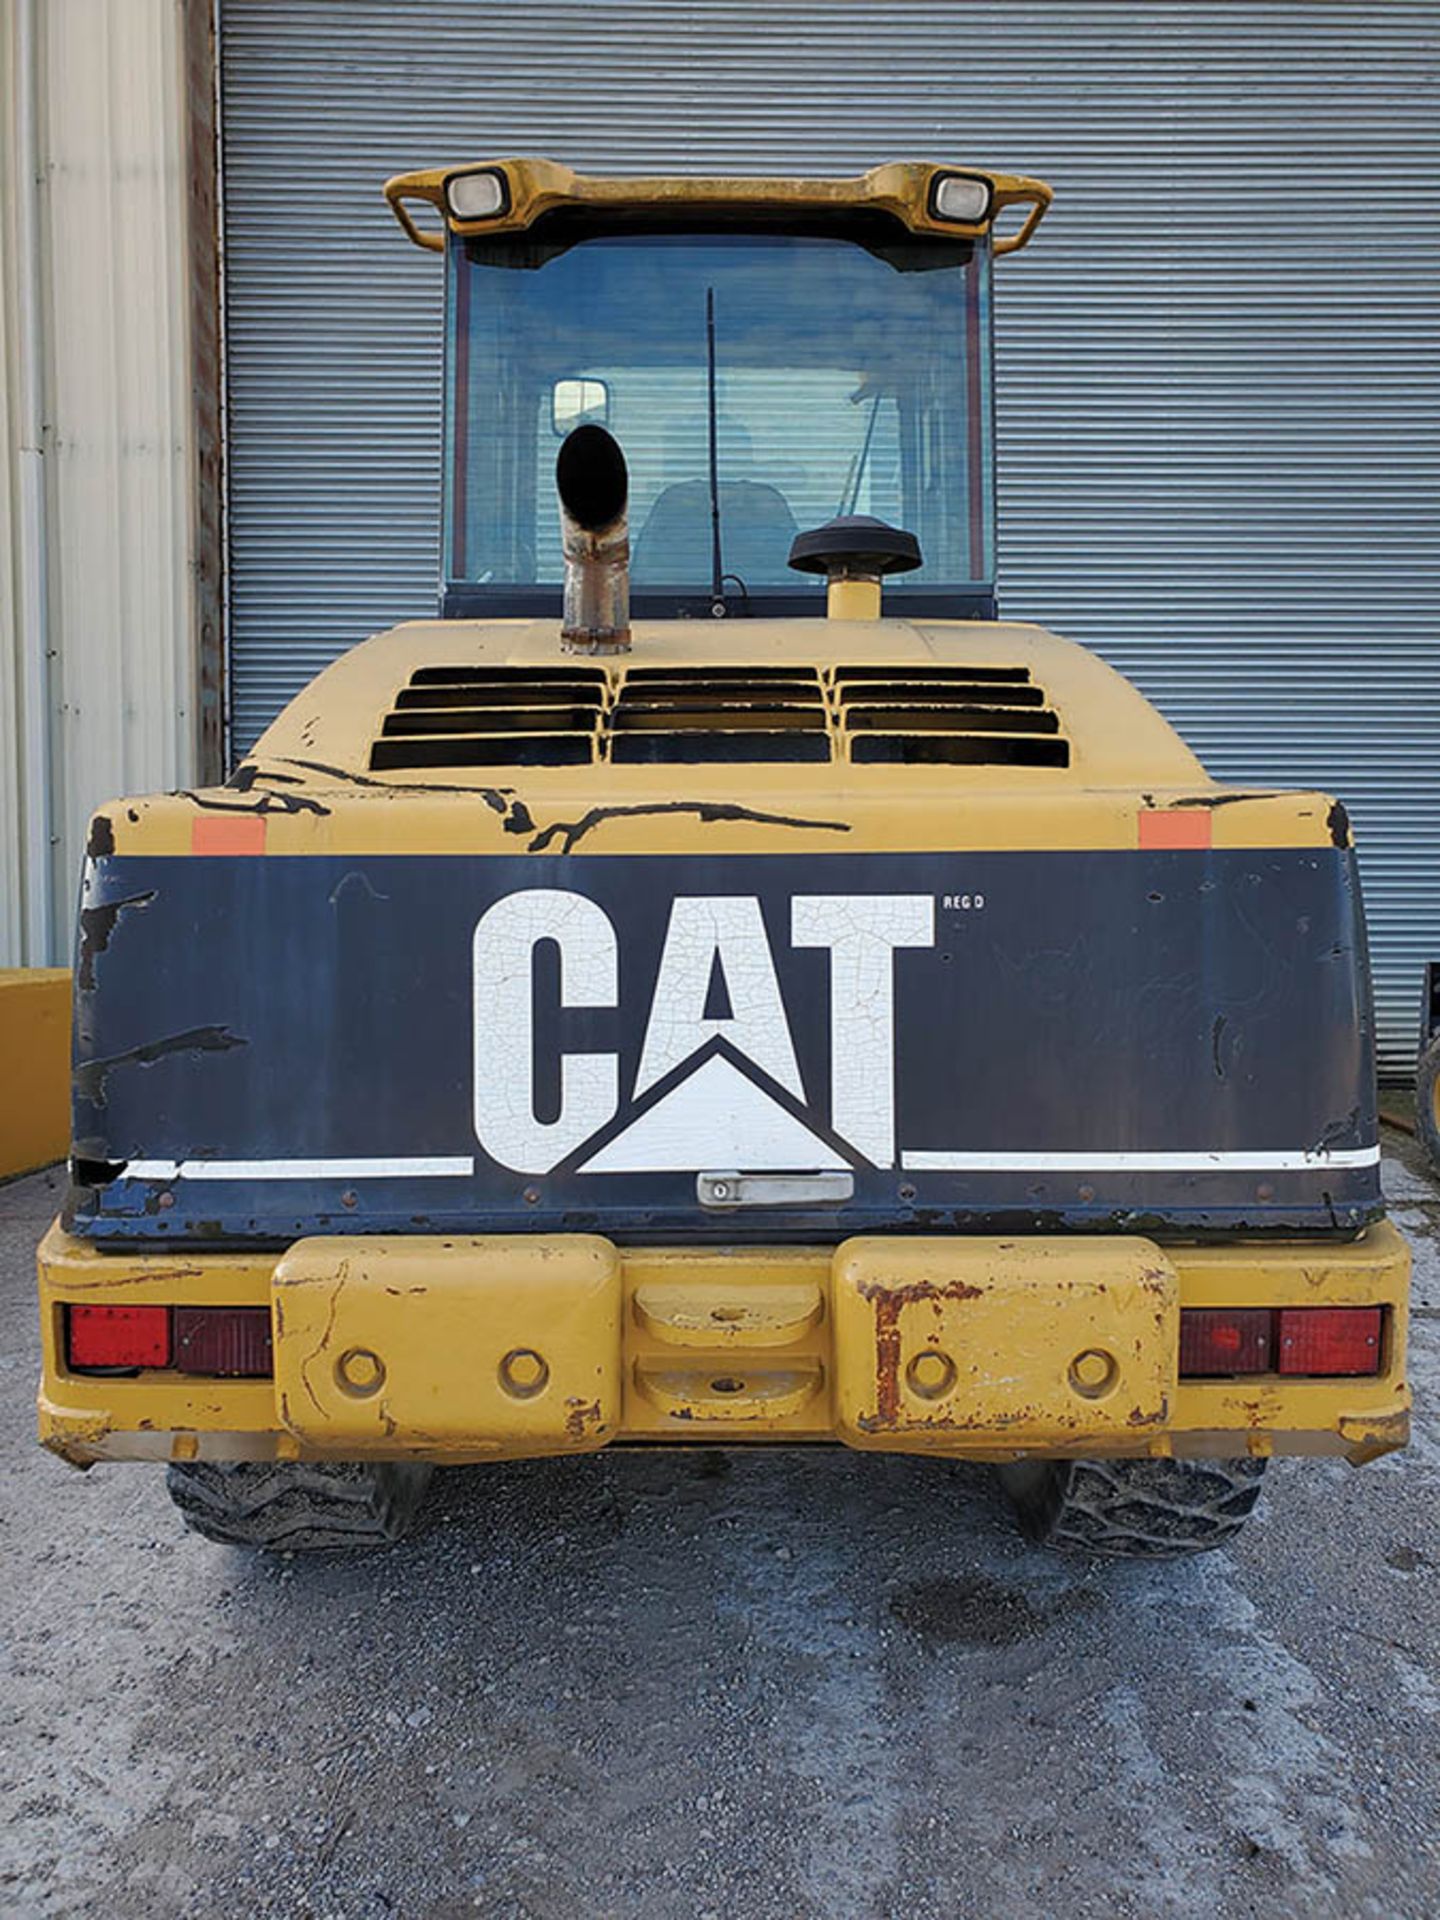 CATERPILLAR IT14G WHEEL LOADER WITH FORKS & BUCKET, PIN 8ZM00195 - Image 7 of 11